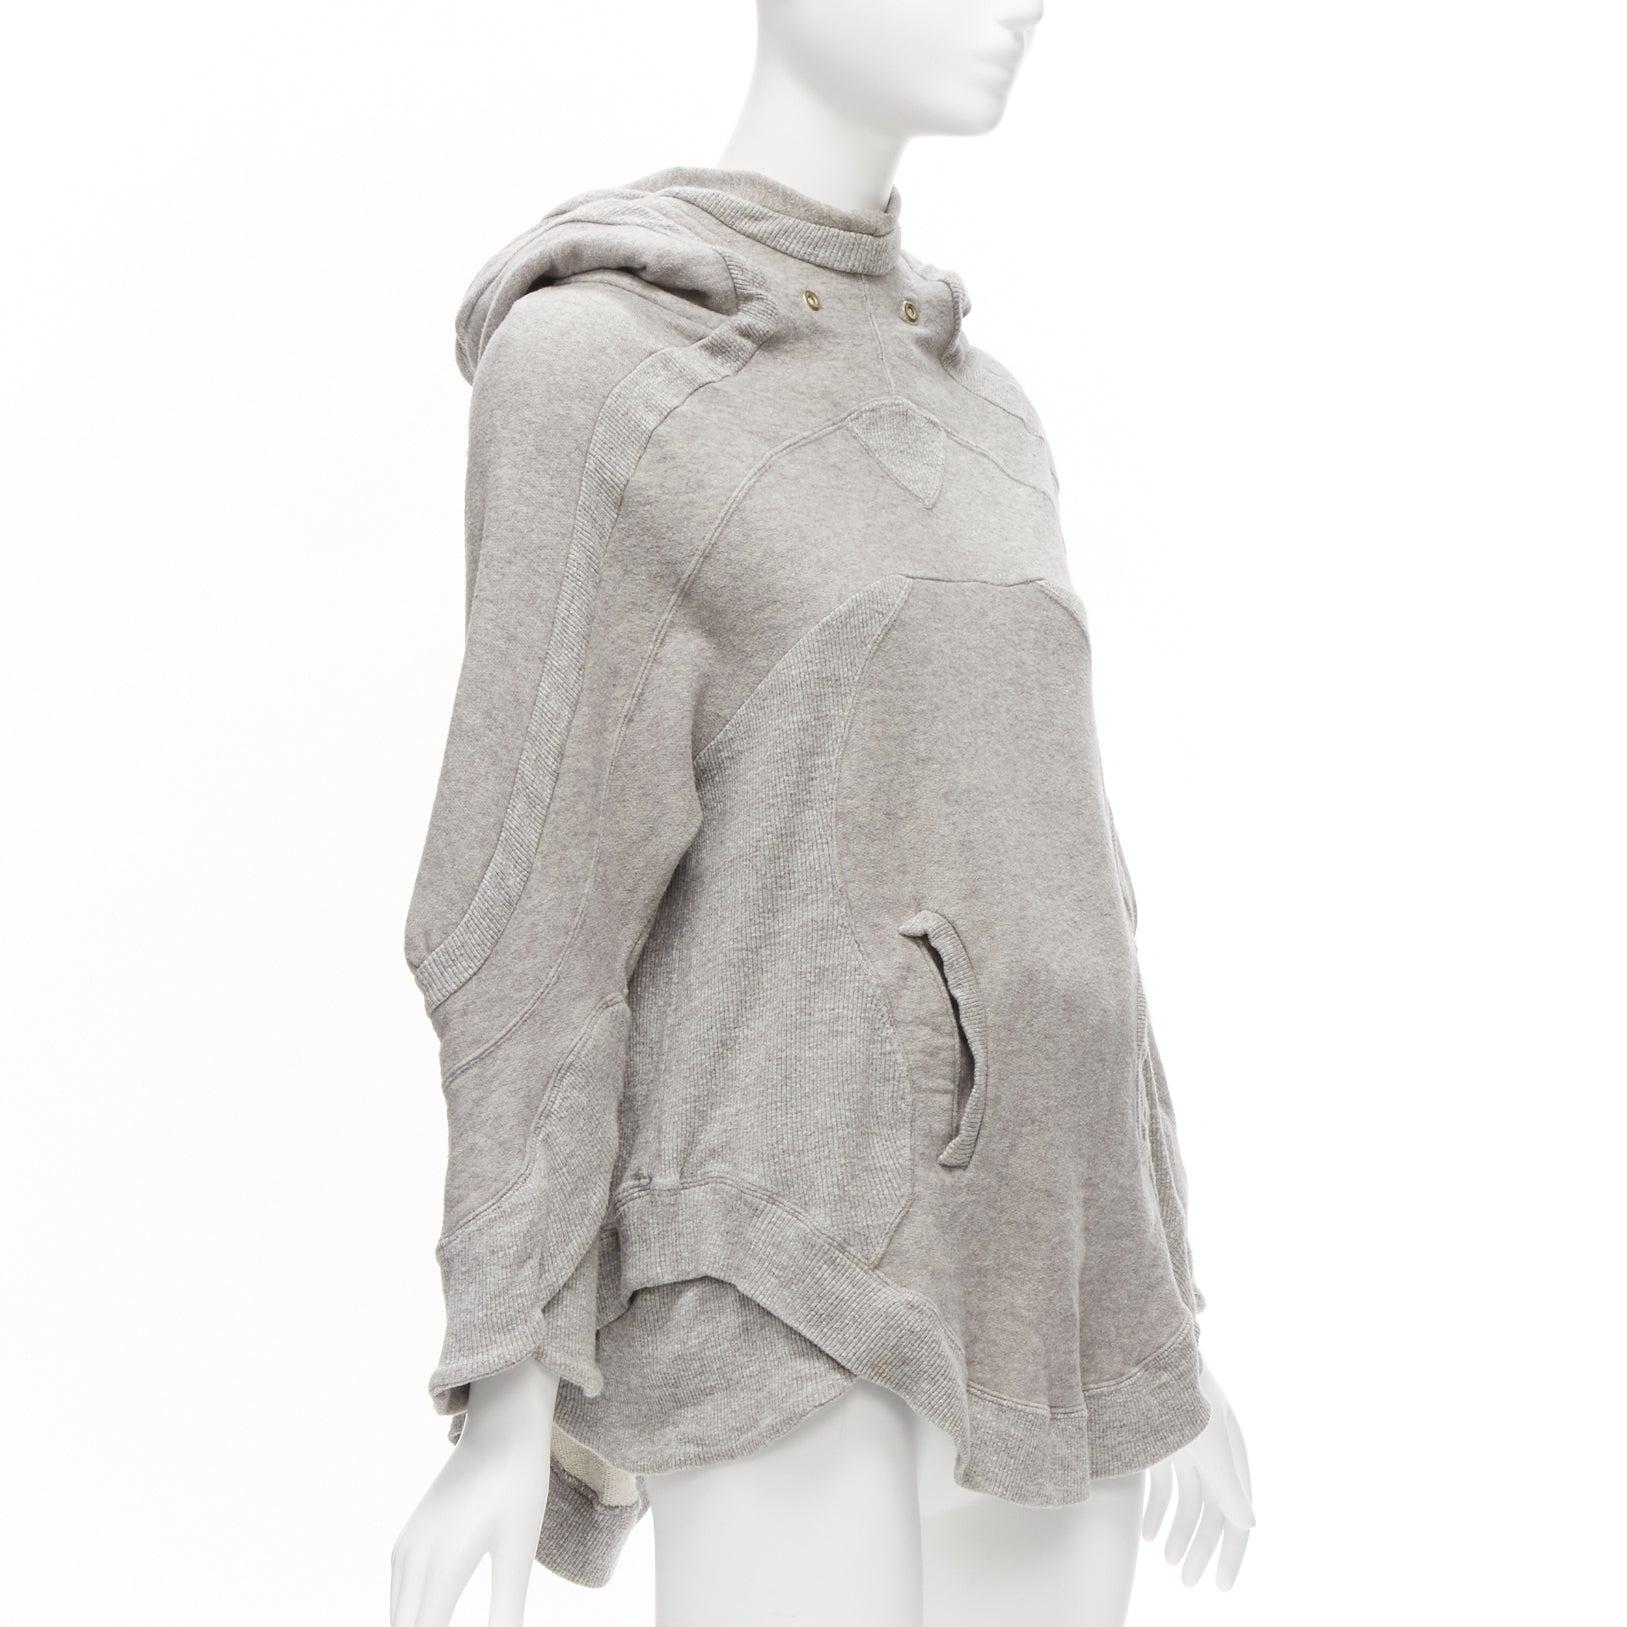 UNDERCOVER grey cotton wool panelled dolman petal sleeves oversized hooded sweatshirt JP1 S
Reference: CAWG/A00270
Brand: Undercover
Material: Cotton, Wool
Color: Grey
Pattern: Solid
Closure: Pullover
Extra Details: Could be worn for a grunge